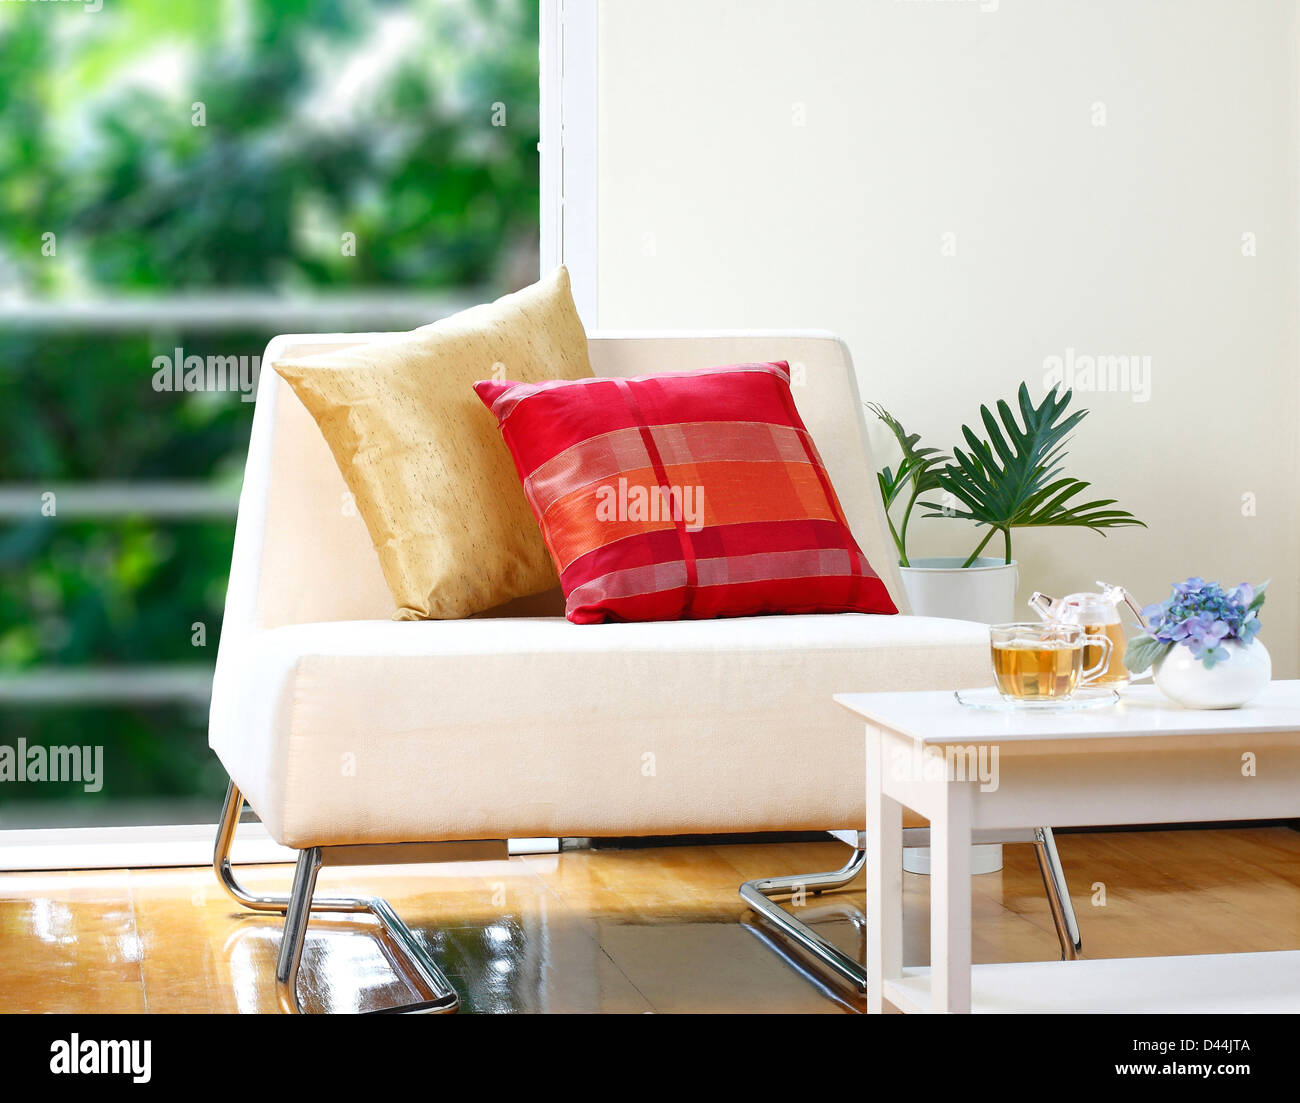 nice and peace interior conner for tea or coffee time Stock Photo